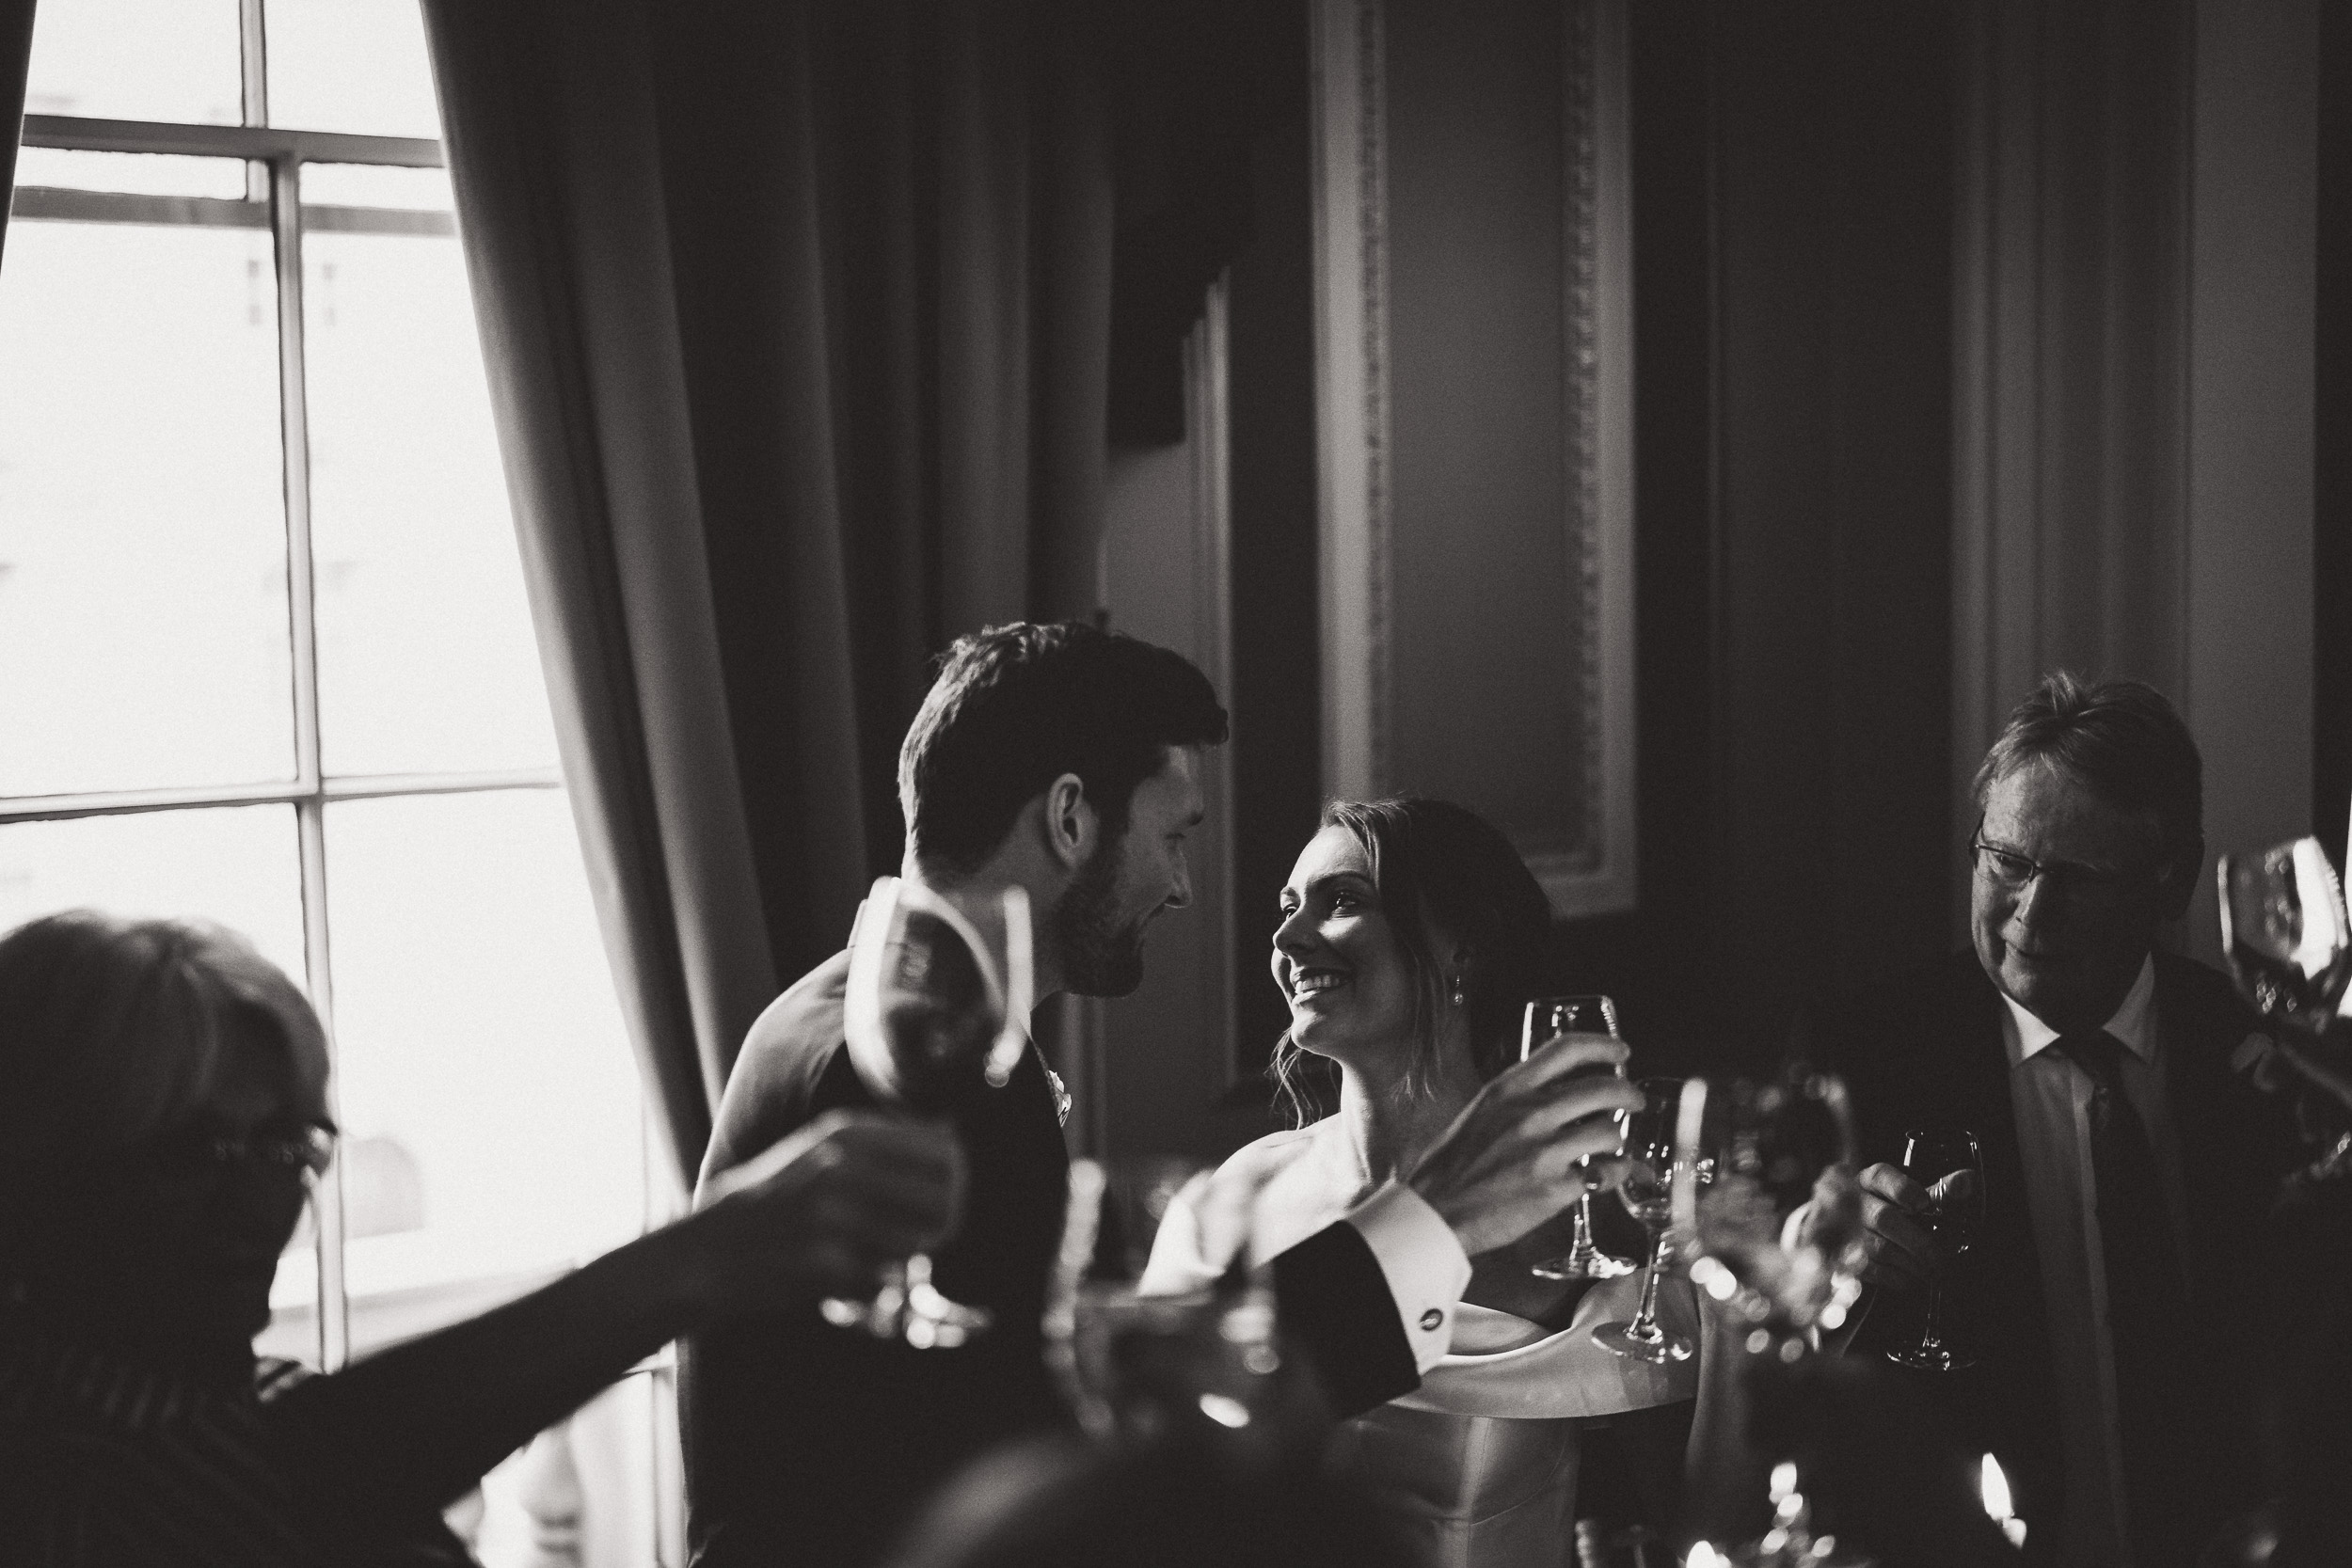 A groom toasting at a wedding reception captured by a wedding photographer.